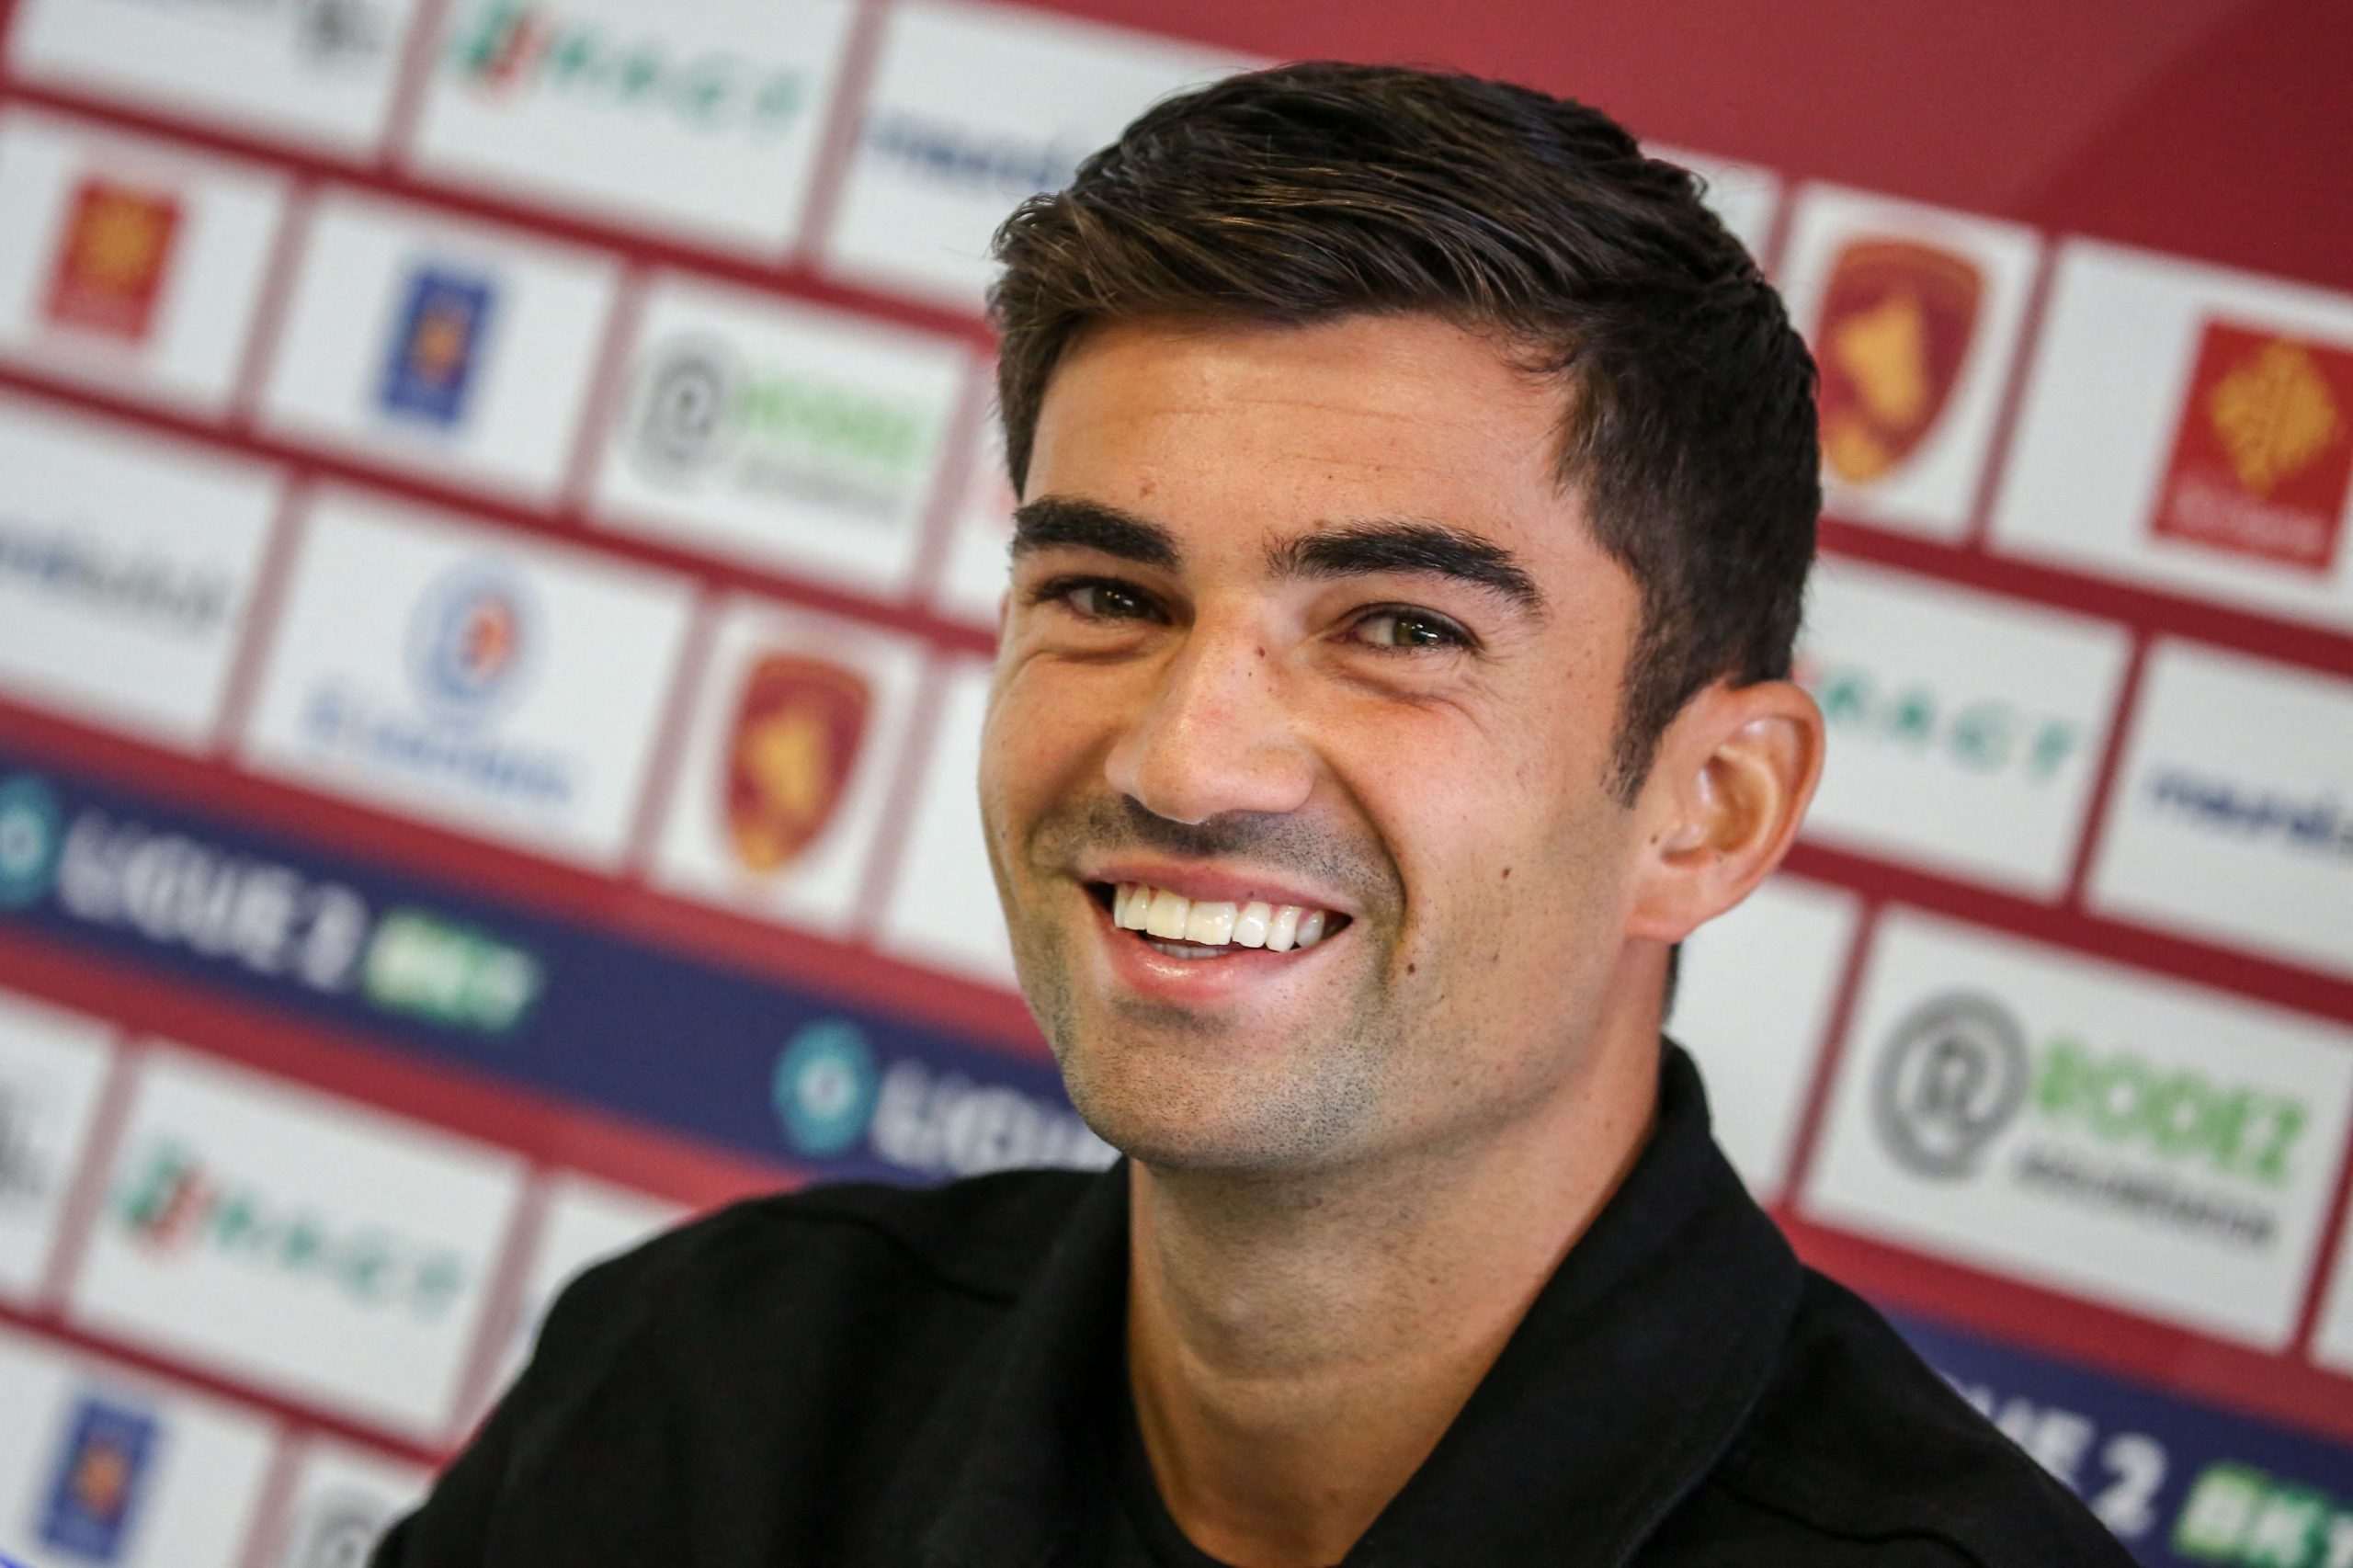 What Happened To Enzo Zidane Teeth? Has He Whitened Them And Used Braces